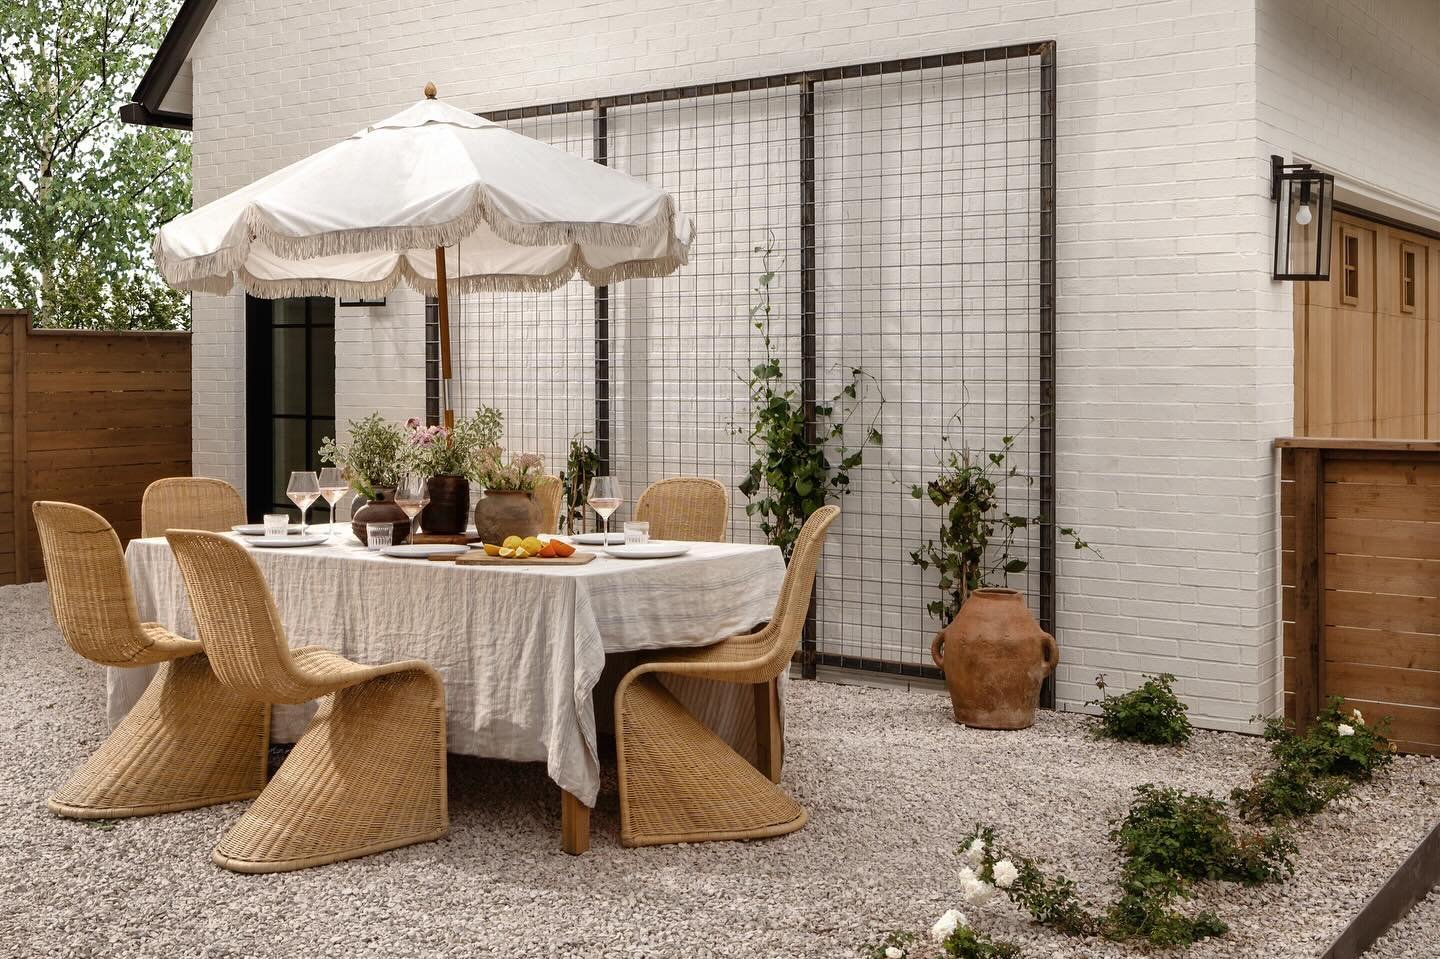 We are so in love with the English-inspired pea gravel patio at our #SinclairIproject 😍 Tucked away as a private oasis, the outdoor patio is the perfect place to enjoy al fresco dining on a gorgeous Austin night.

photo: @thevuvobandit